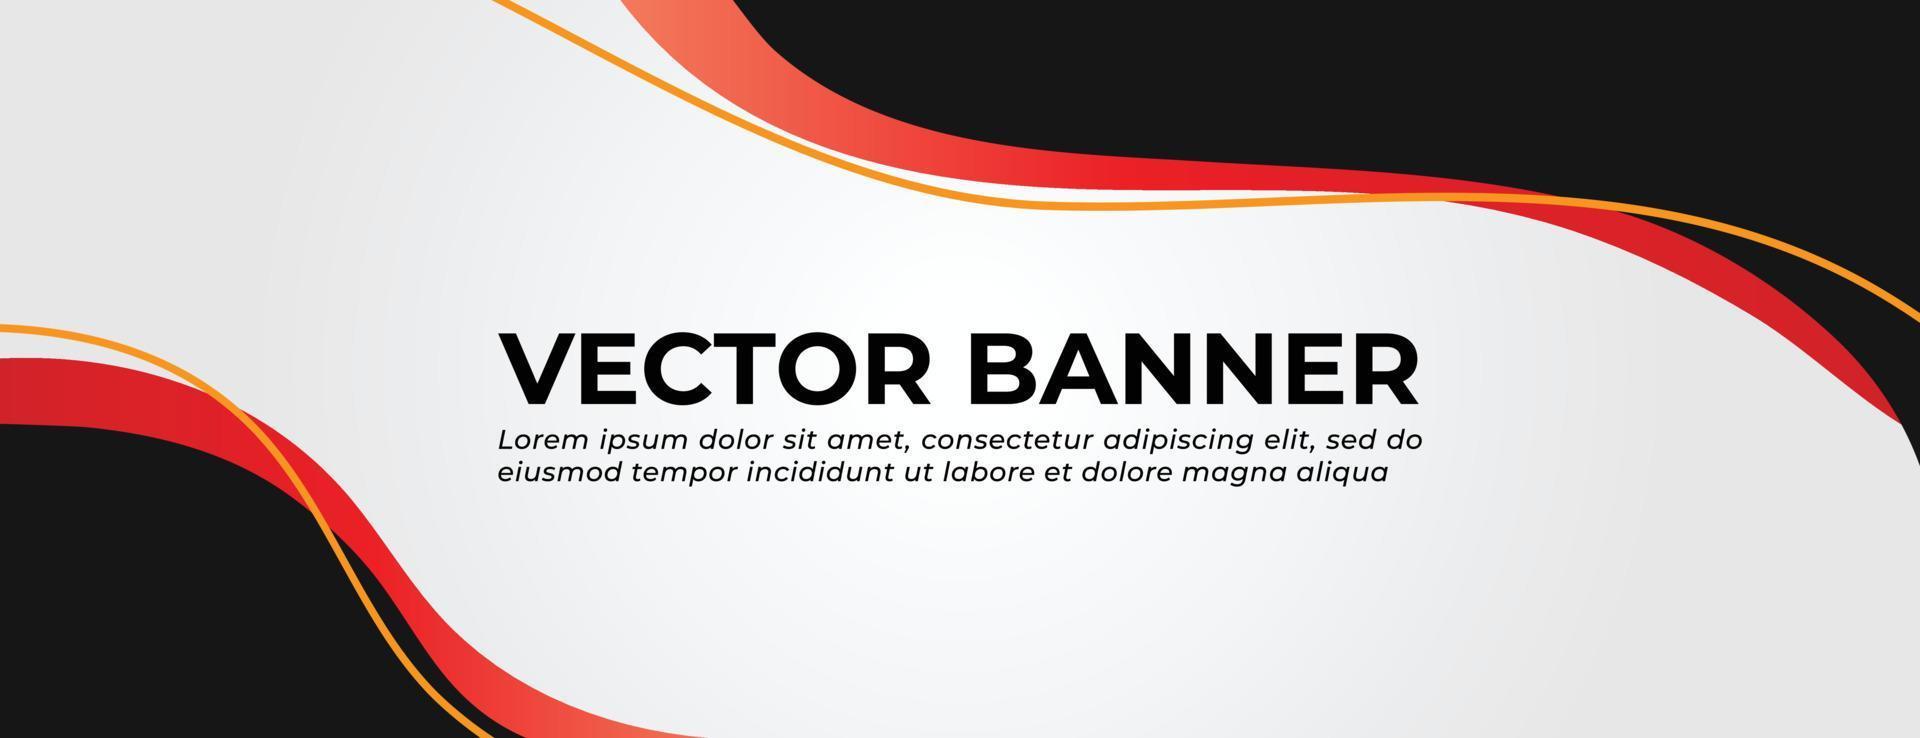 Black and Red Vector Banner with Waves Template Design